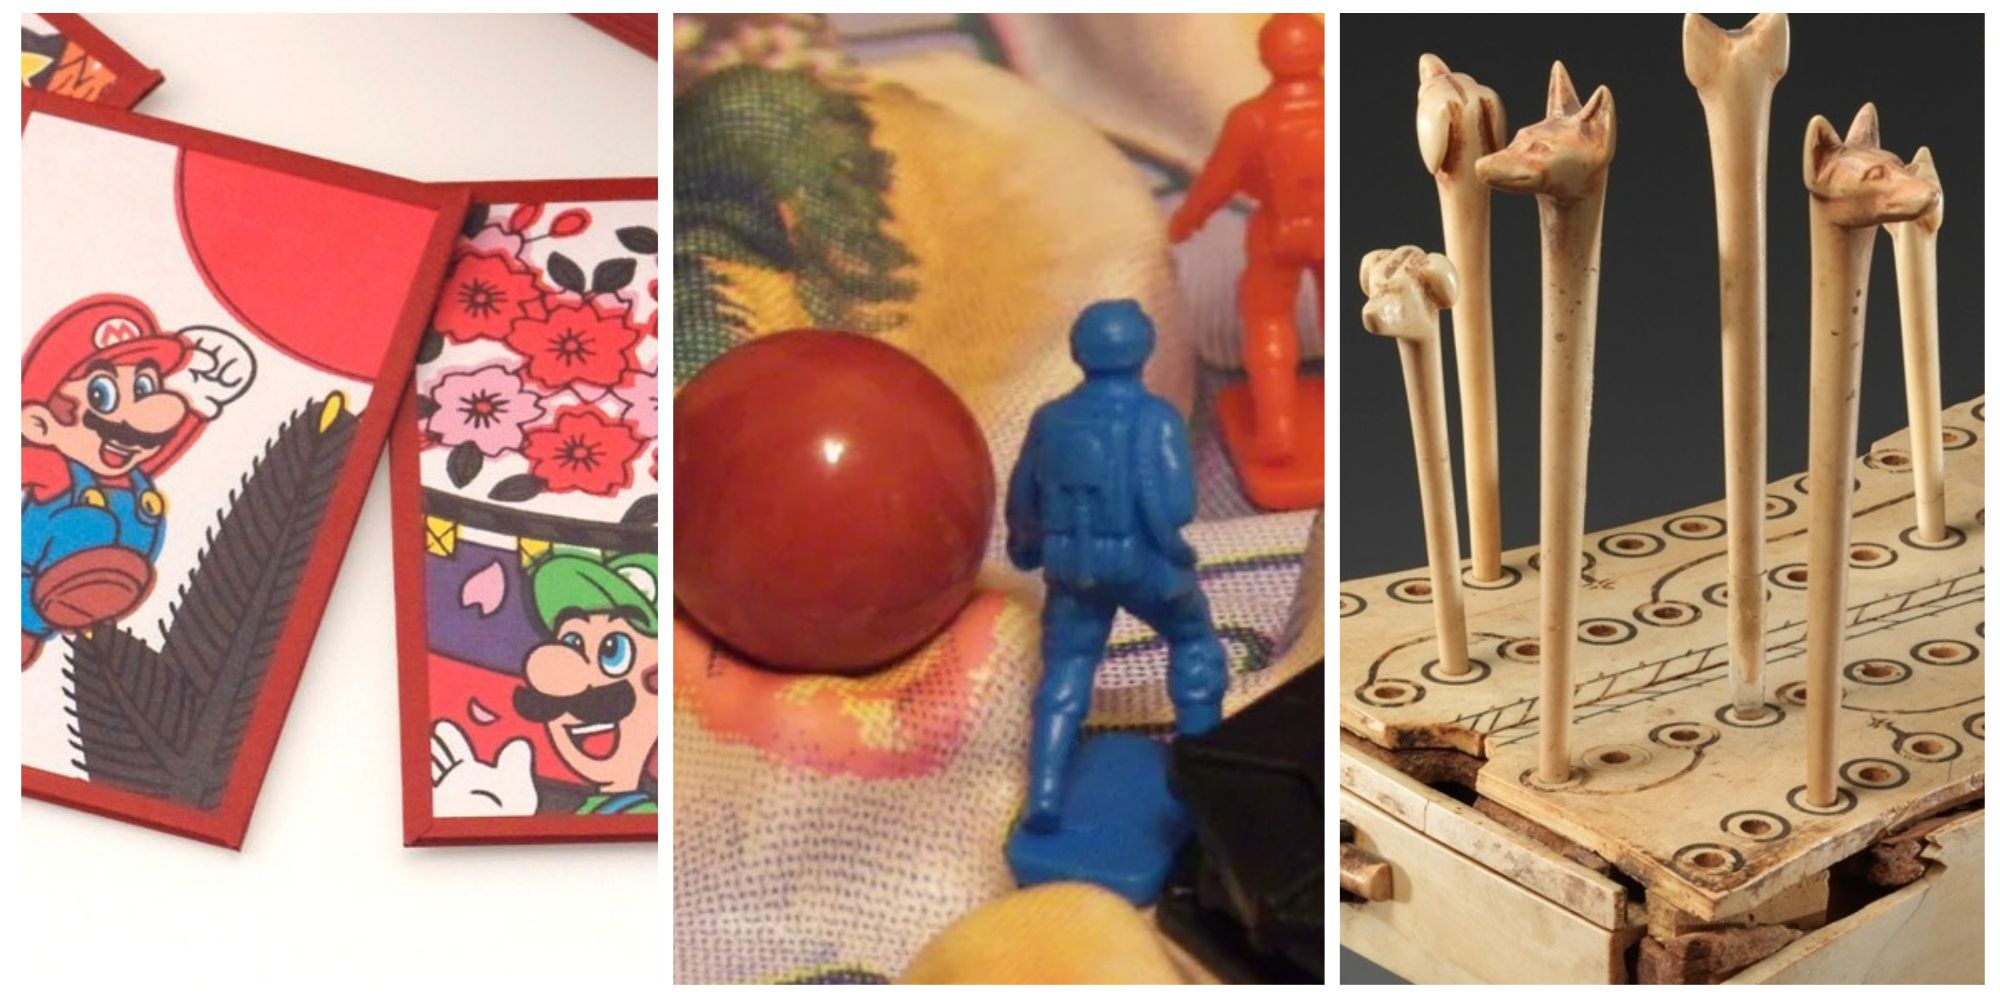 A Collage of Super Mario hanafuda cards, Fireball Island game pieces, and a Hounds and Jackals set